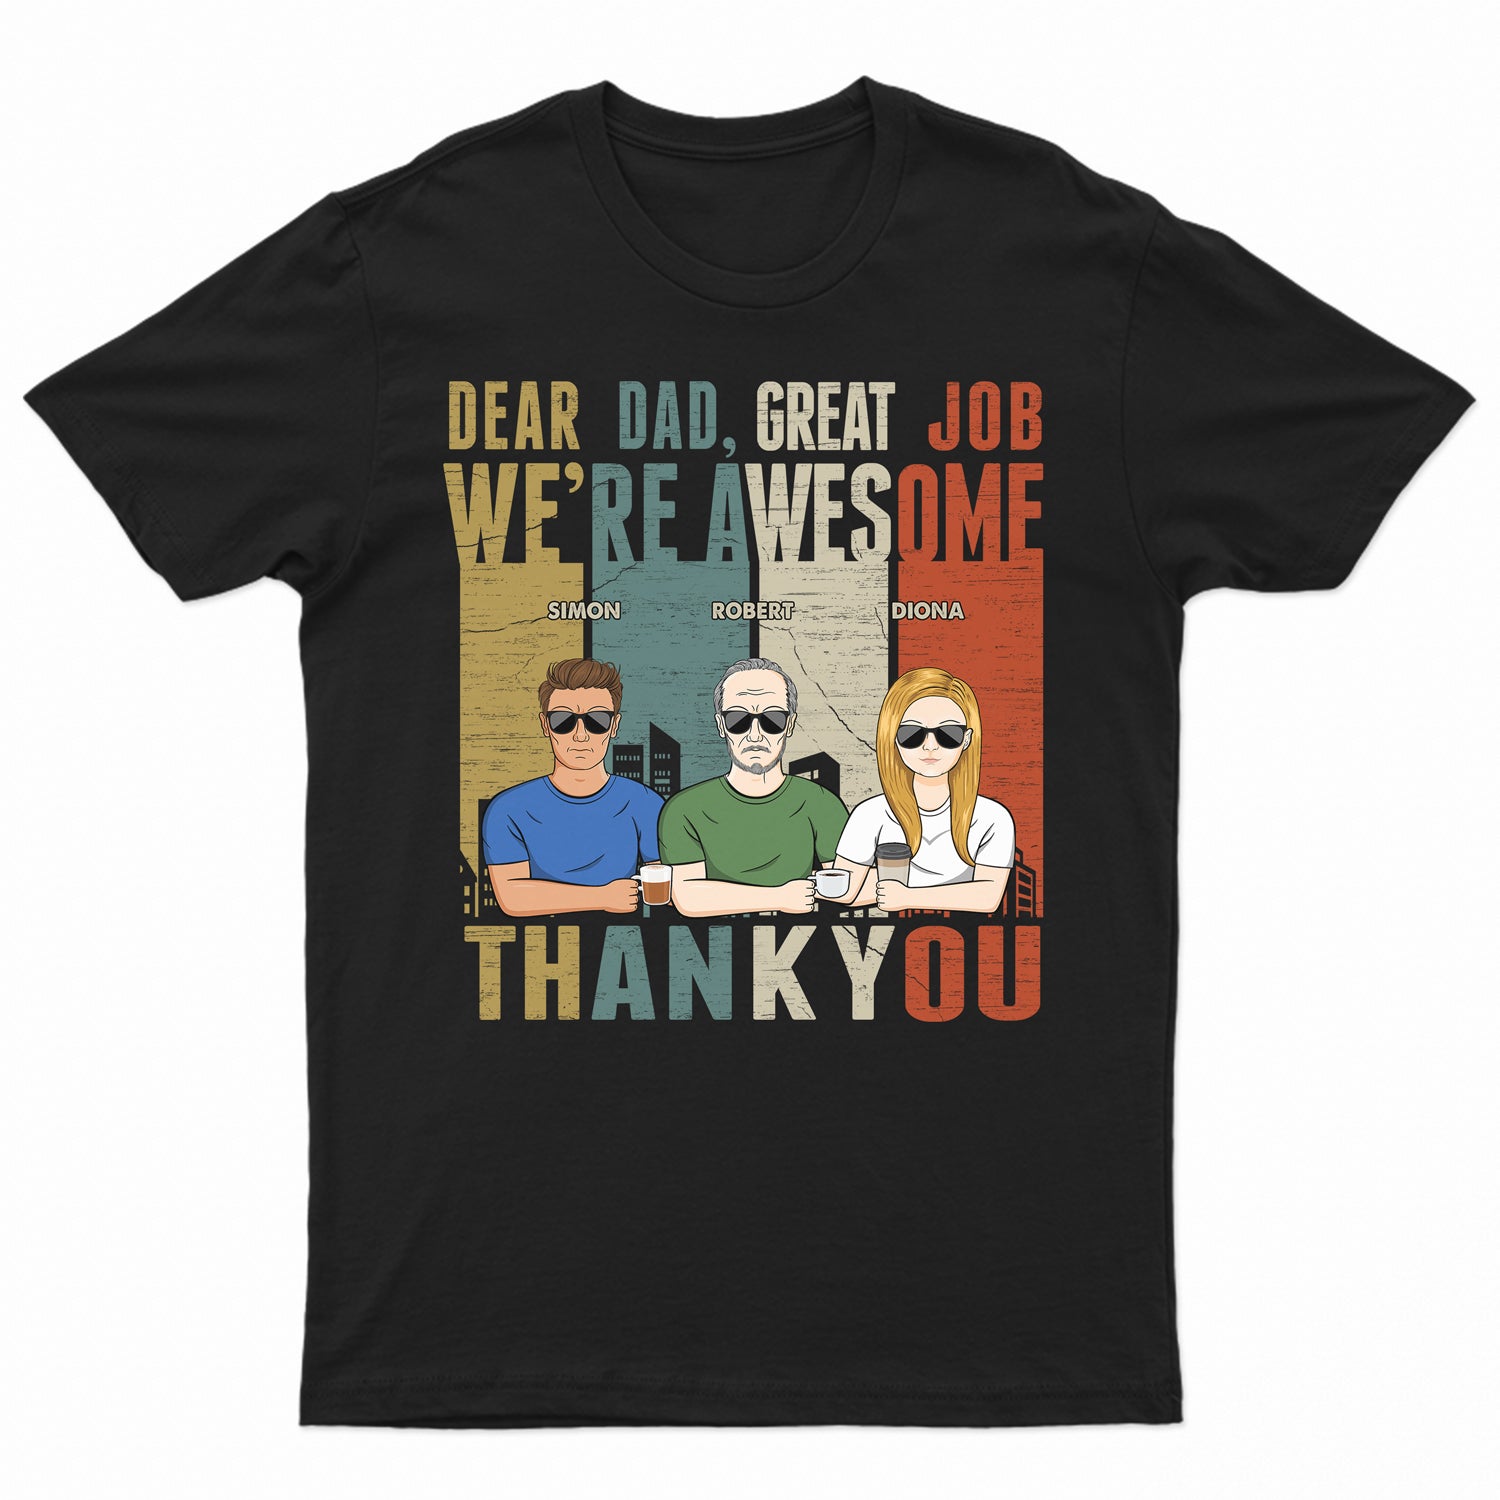 Great Job We're Awesome Thank You - Birthday, Loving Gift For Dad, Father, Grandpa, Grandfather - Personalized Custom T Shirt